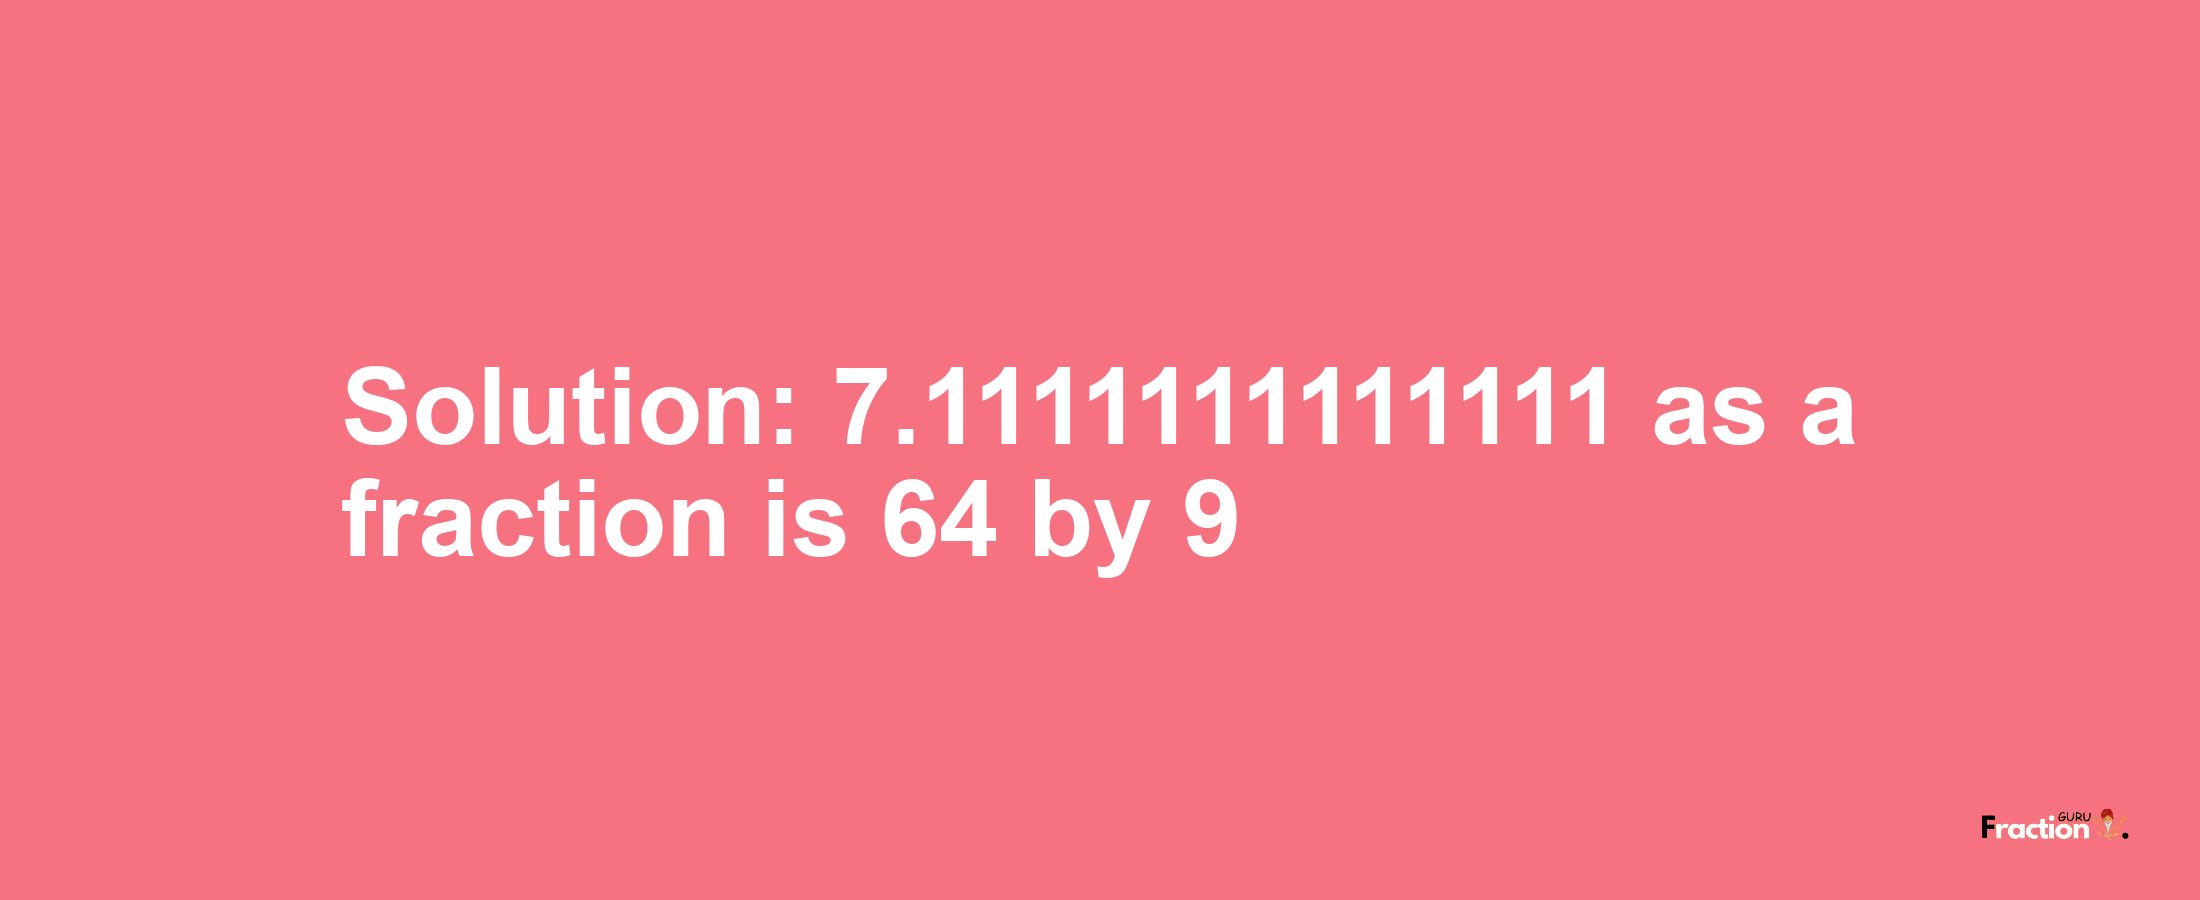 Solution:7.1111111111111 as a fraction is 64/9